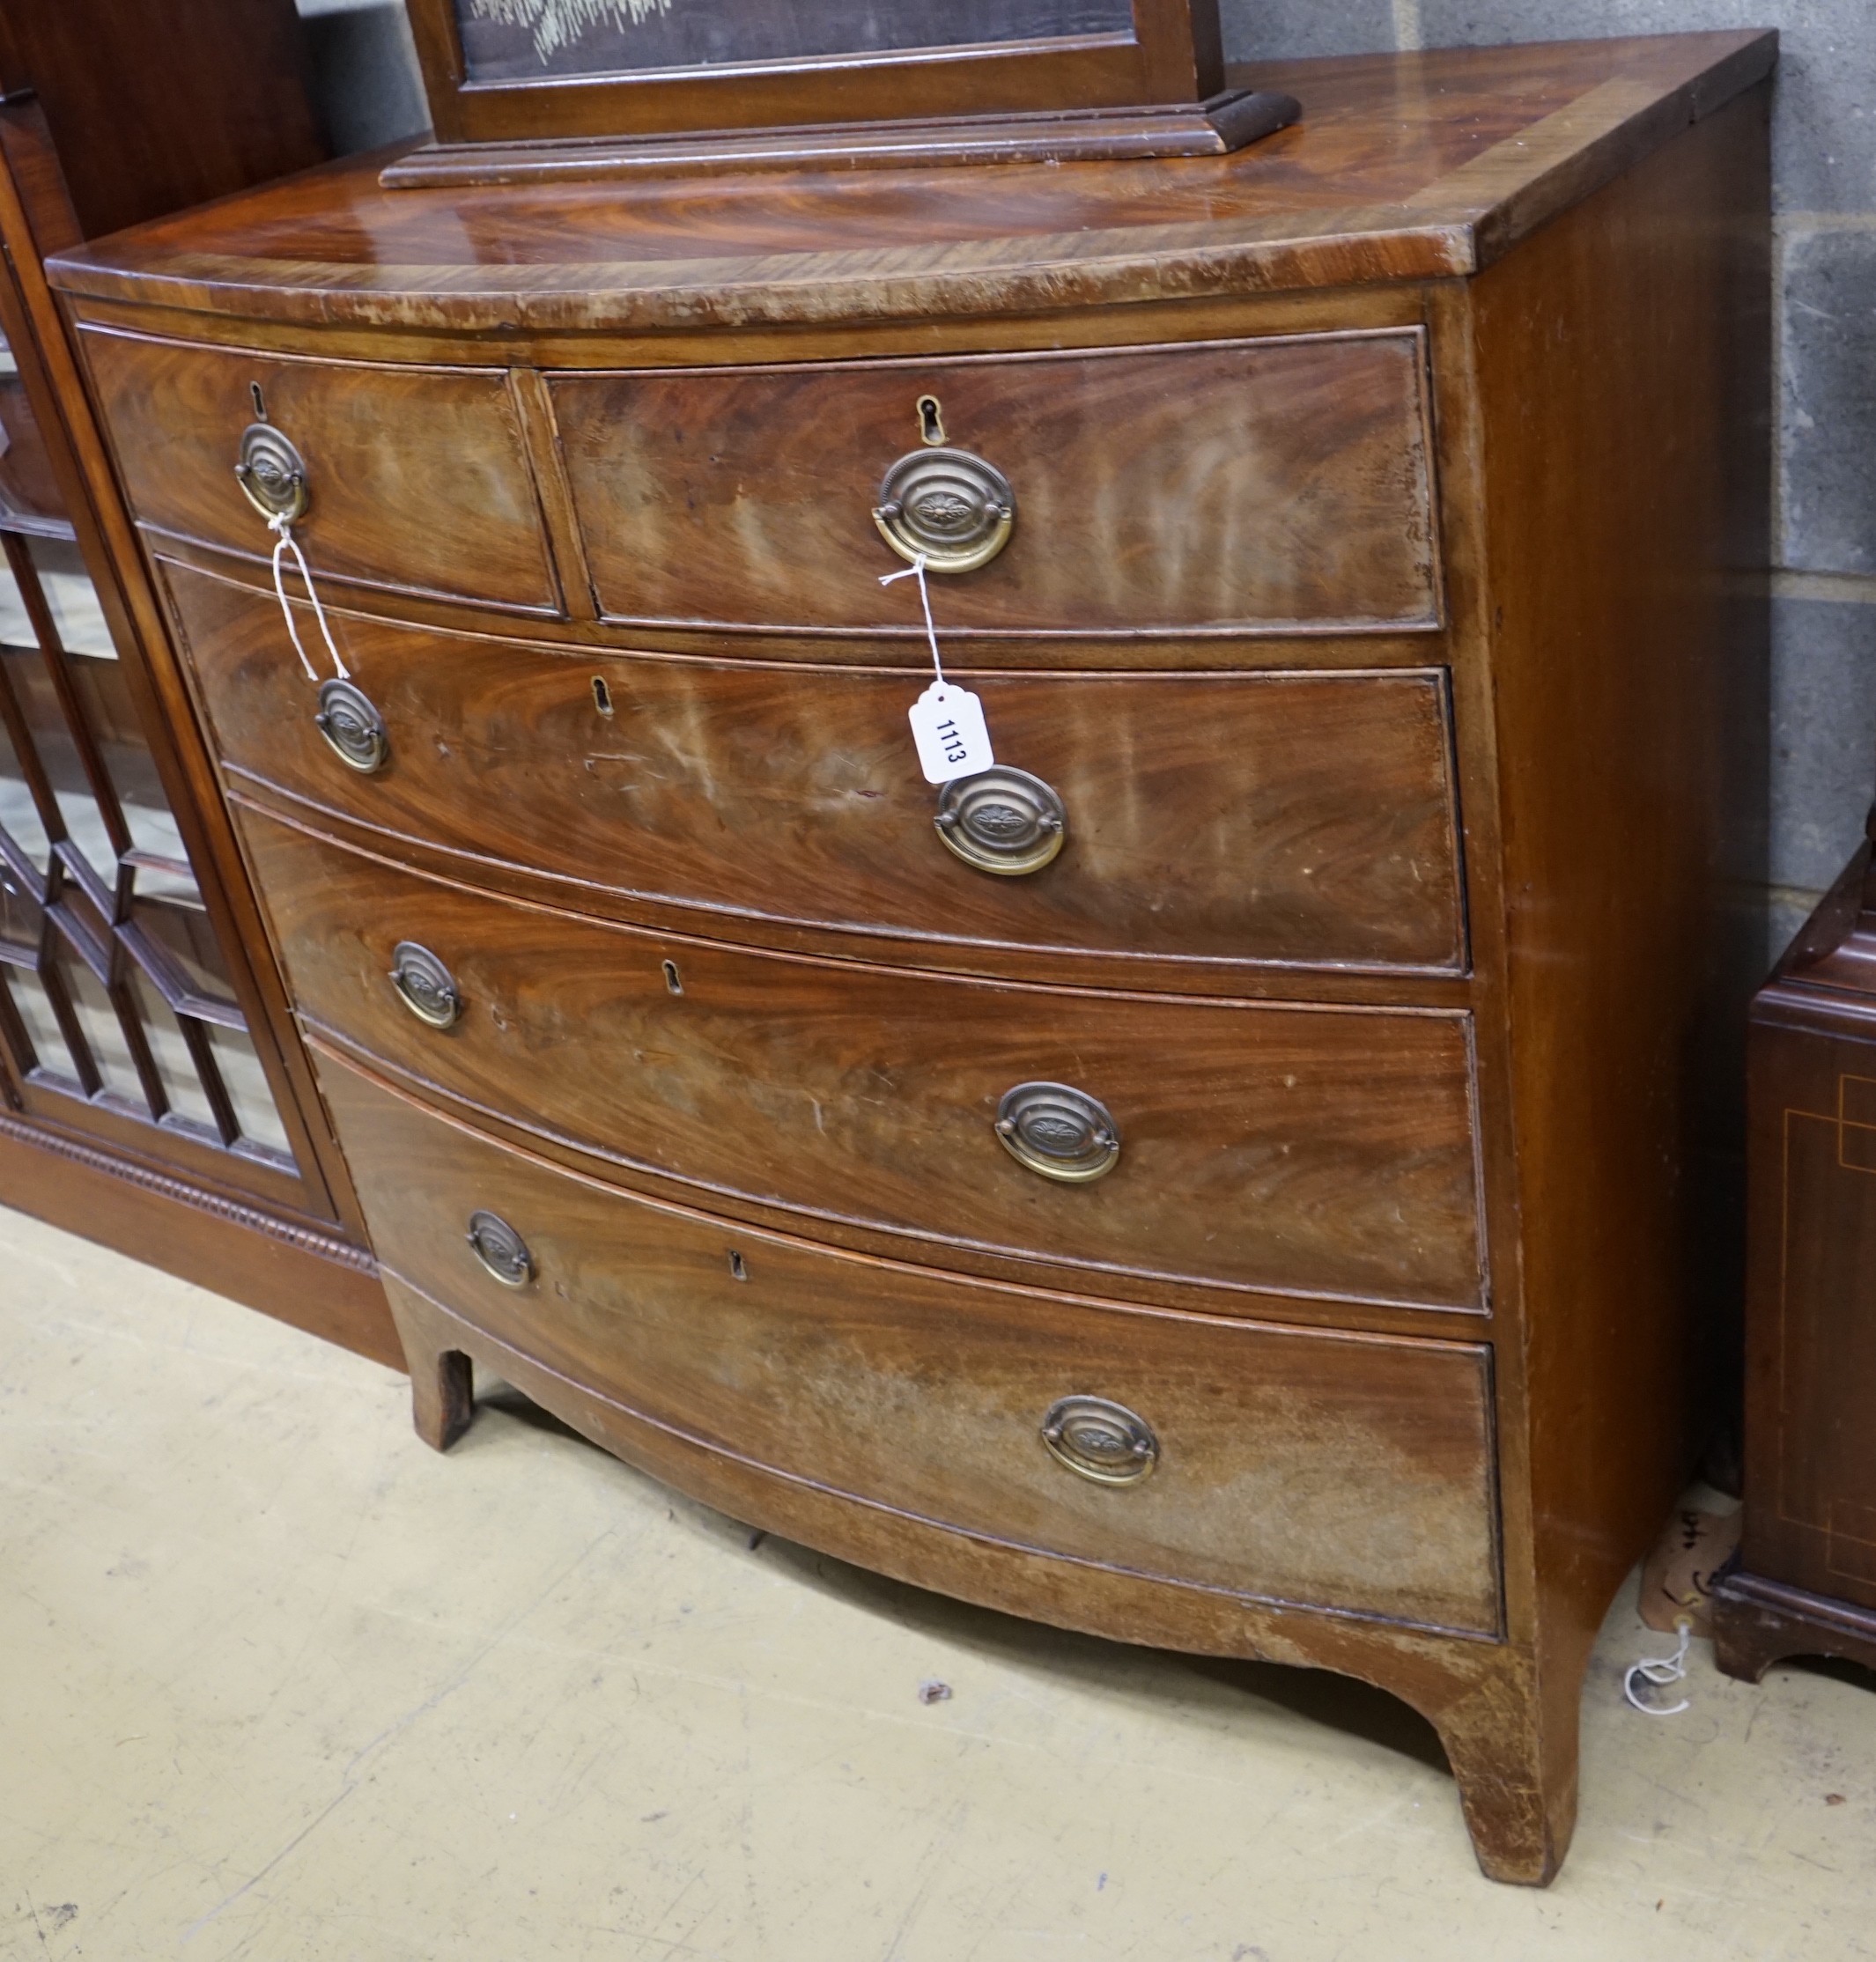 A Regency mahogany bow-front chest with two short and three long drawers, width 104cm, depth 53cm, height 104cm